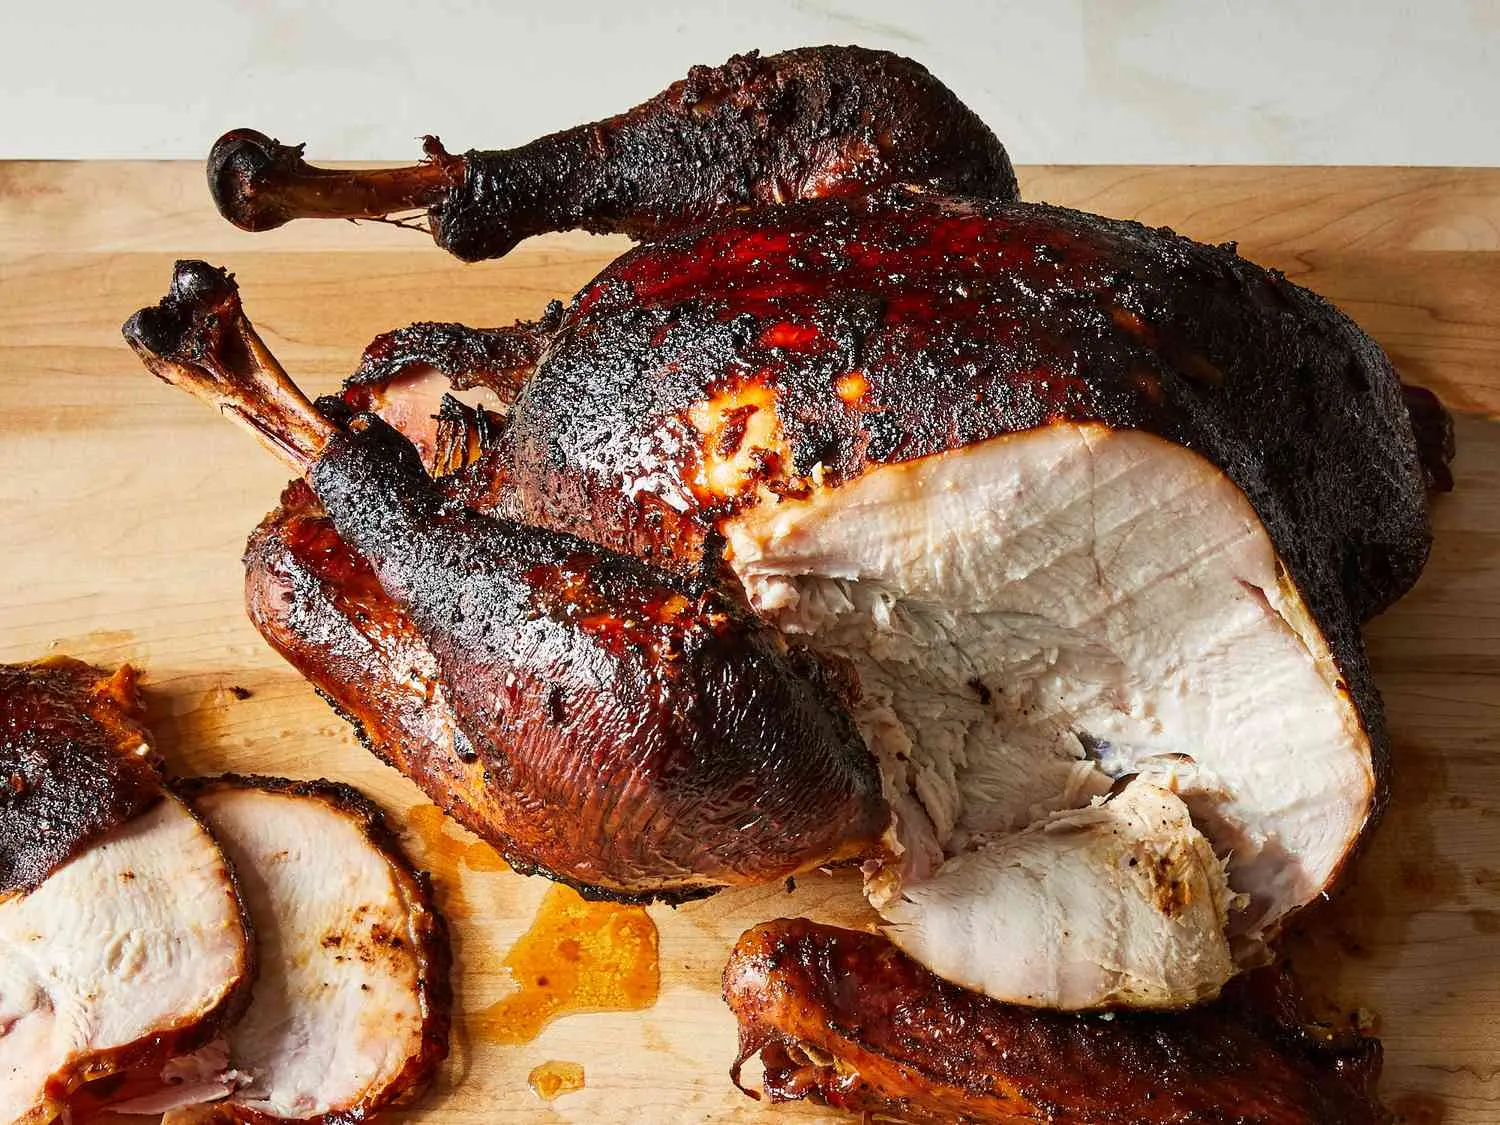 bbq smoked turkey - Is smoked turkey cooked or raw